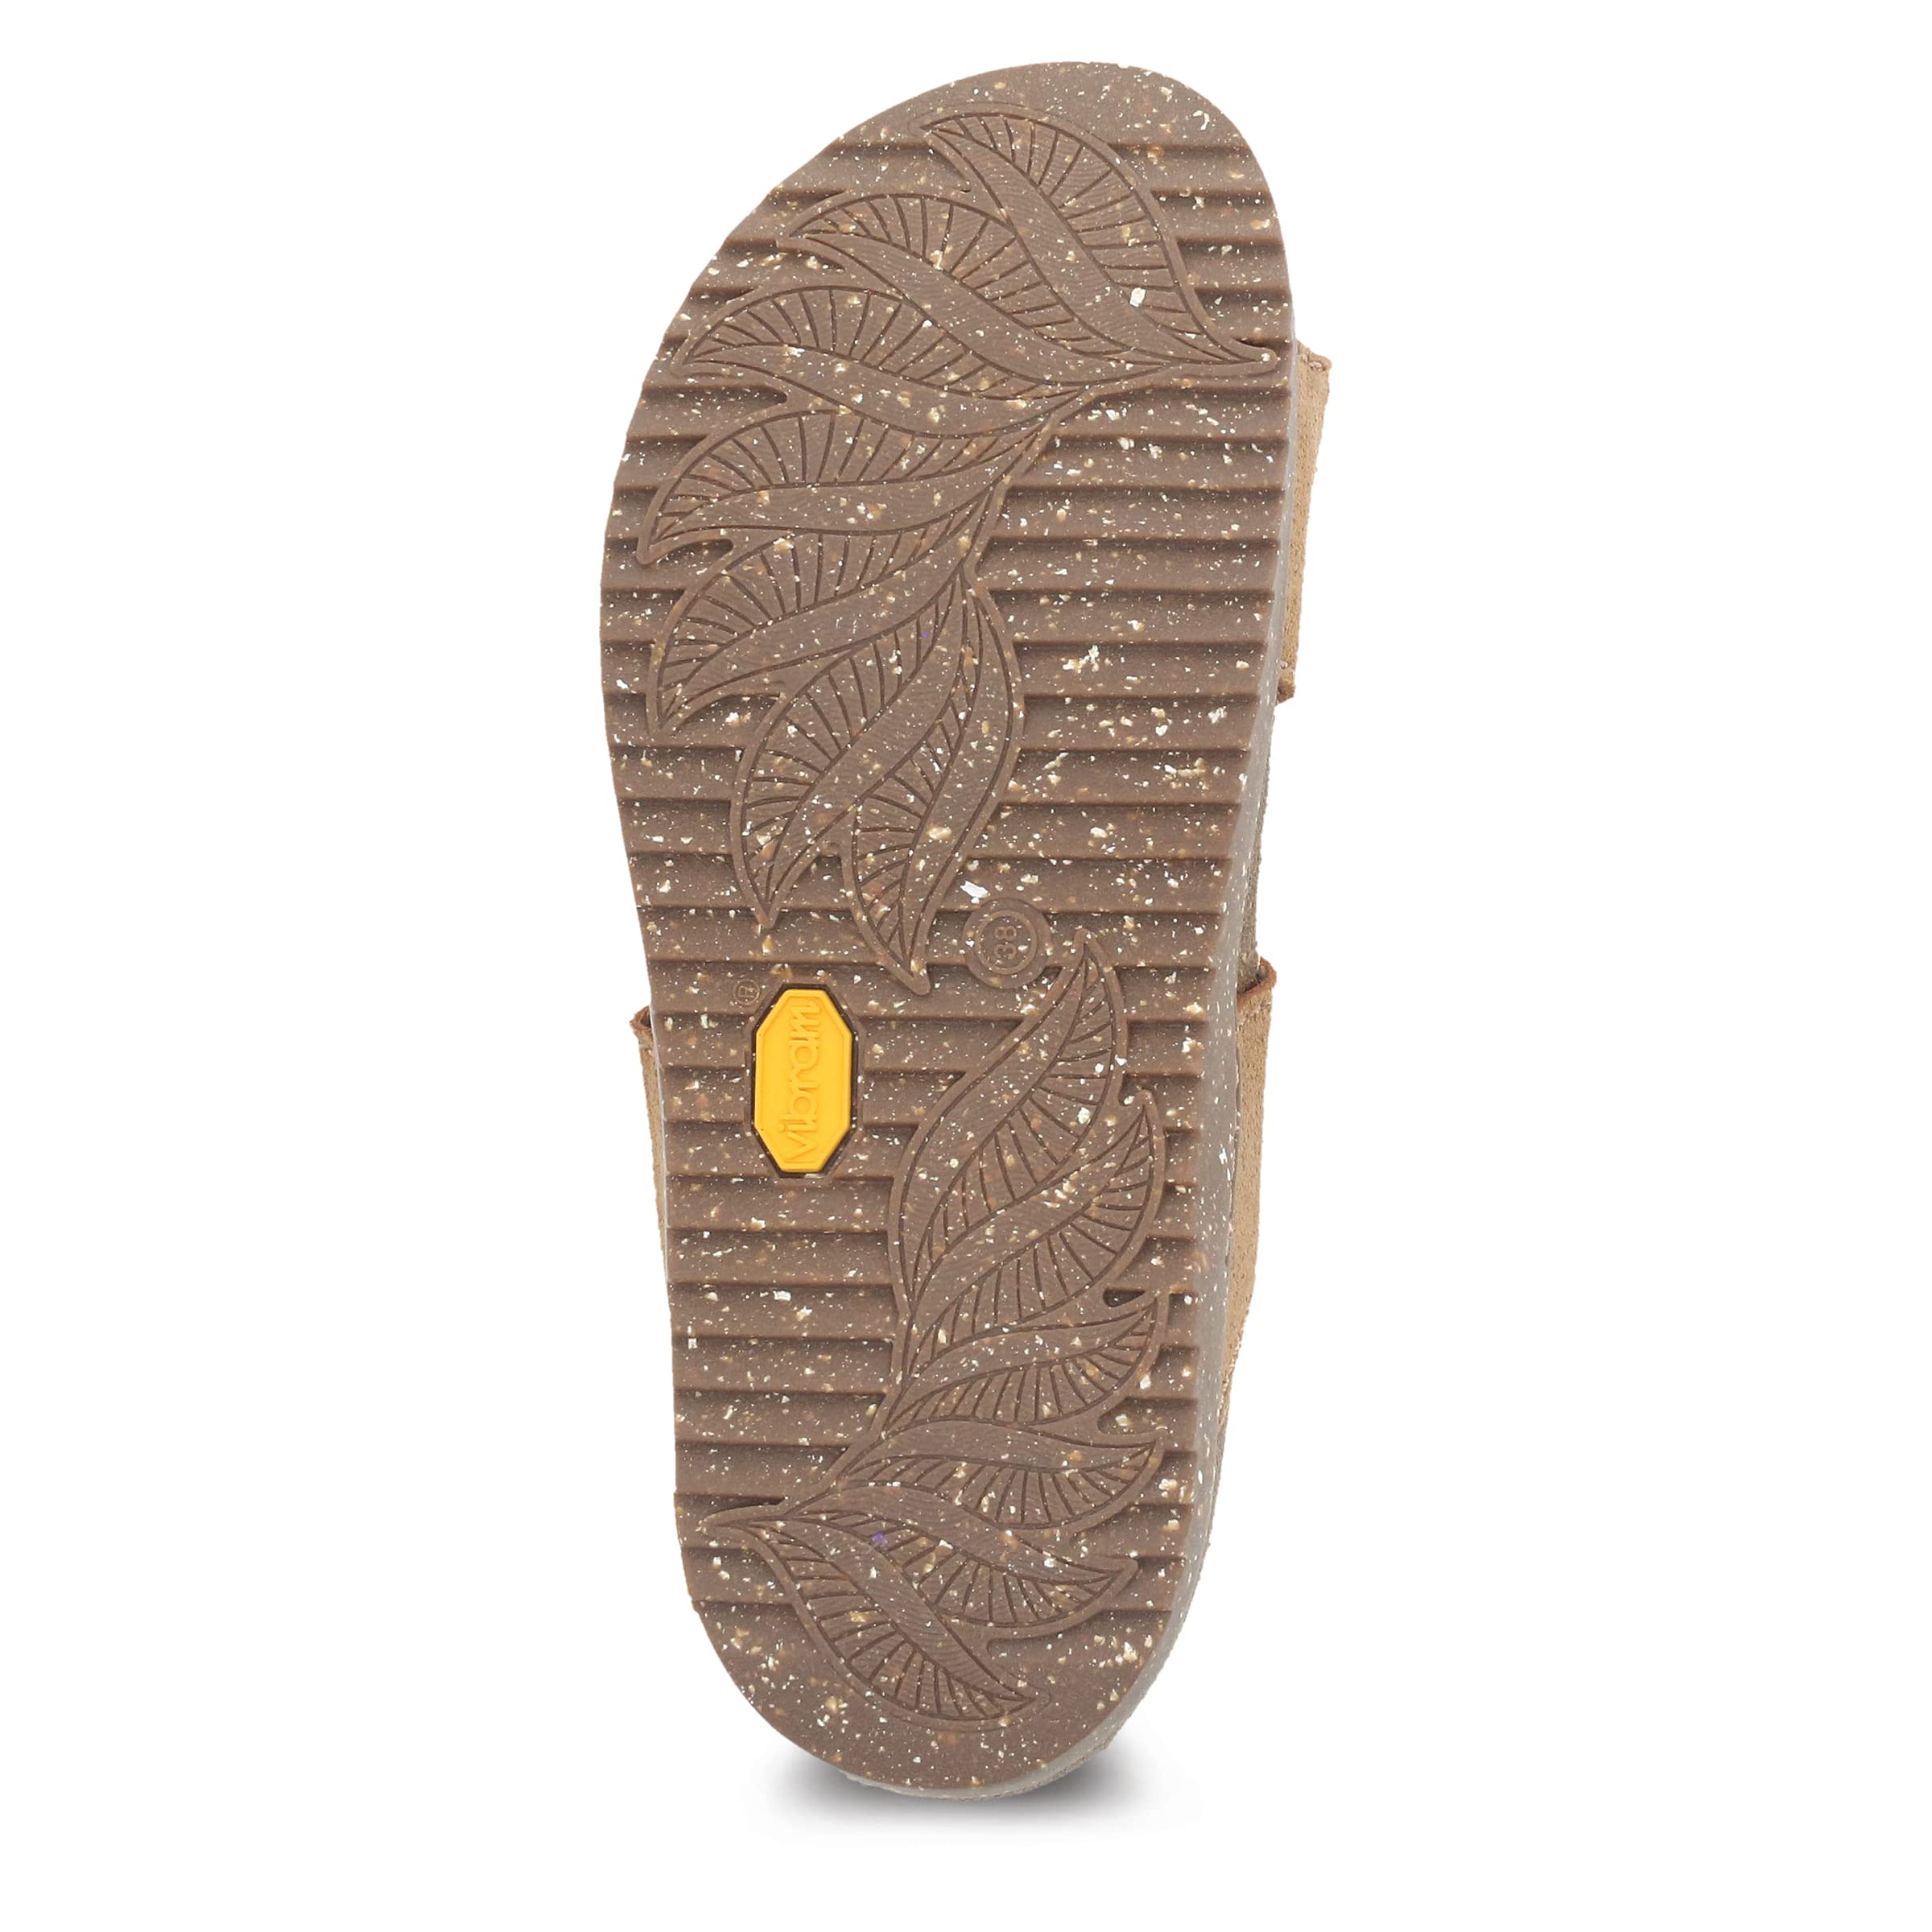 Dansko Dayna Double Buckle, Slip-On Suede Sandal for Women – Cushioned, Contoured Cork midsole for Comfort and Shock Absorption – Vibram ECOSTEP EVO Rubber Outsole For Long-Lasting Wear